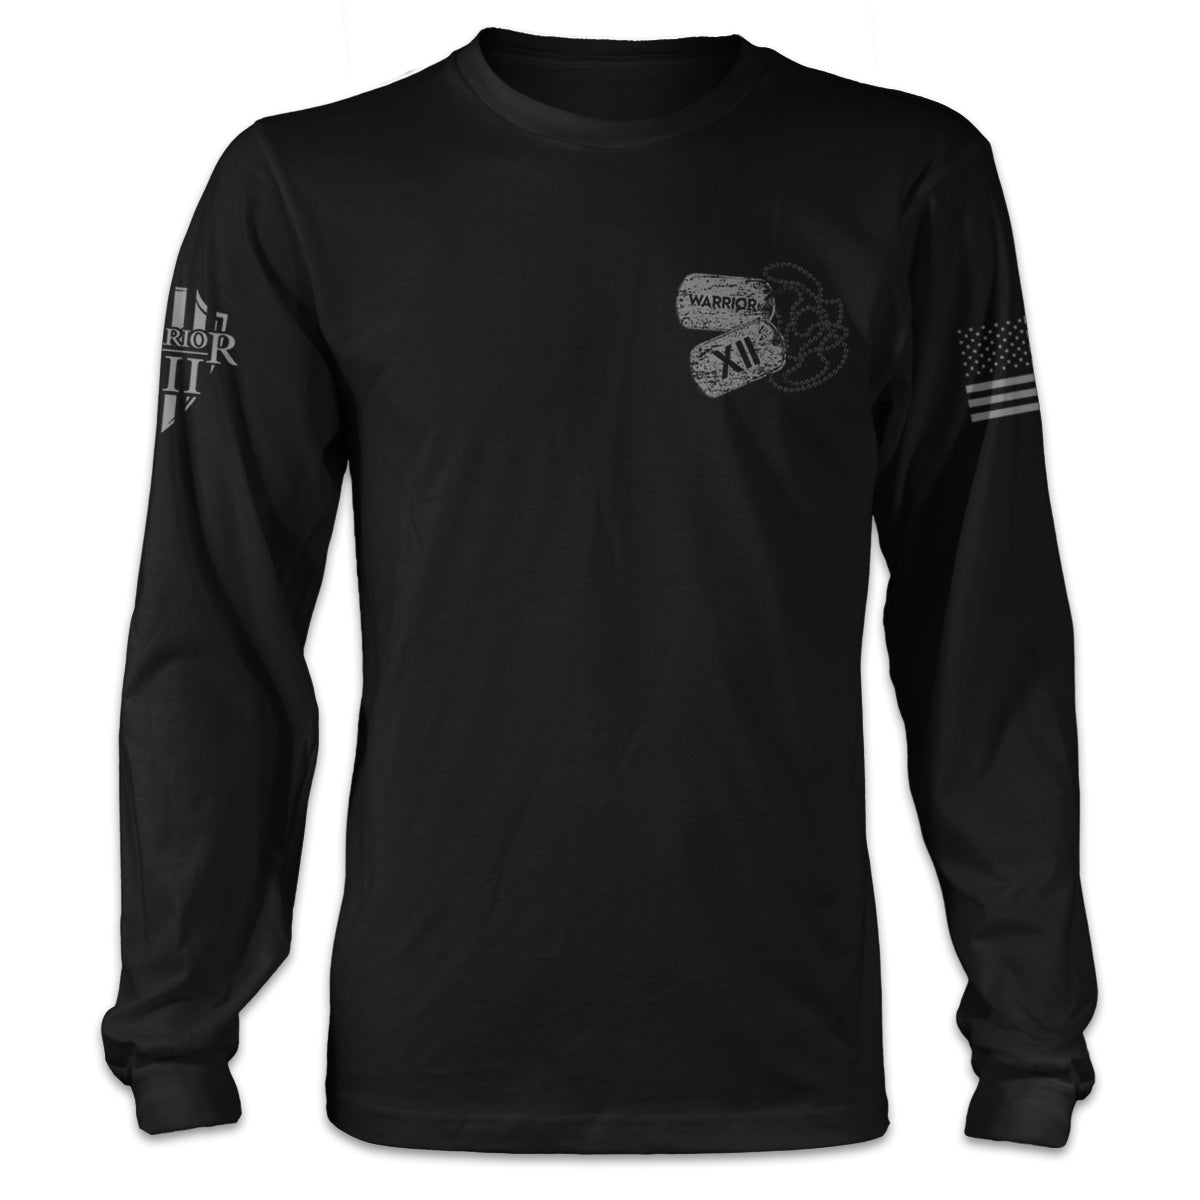 A black long sleeve shirt with two tags saying Warrior XII printed on the front.